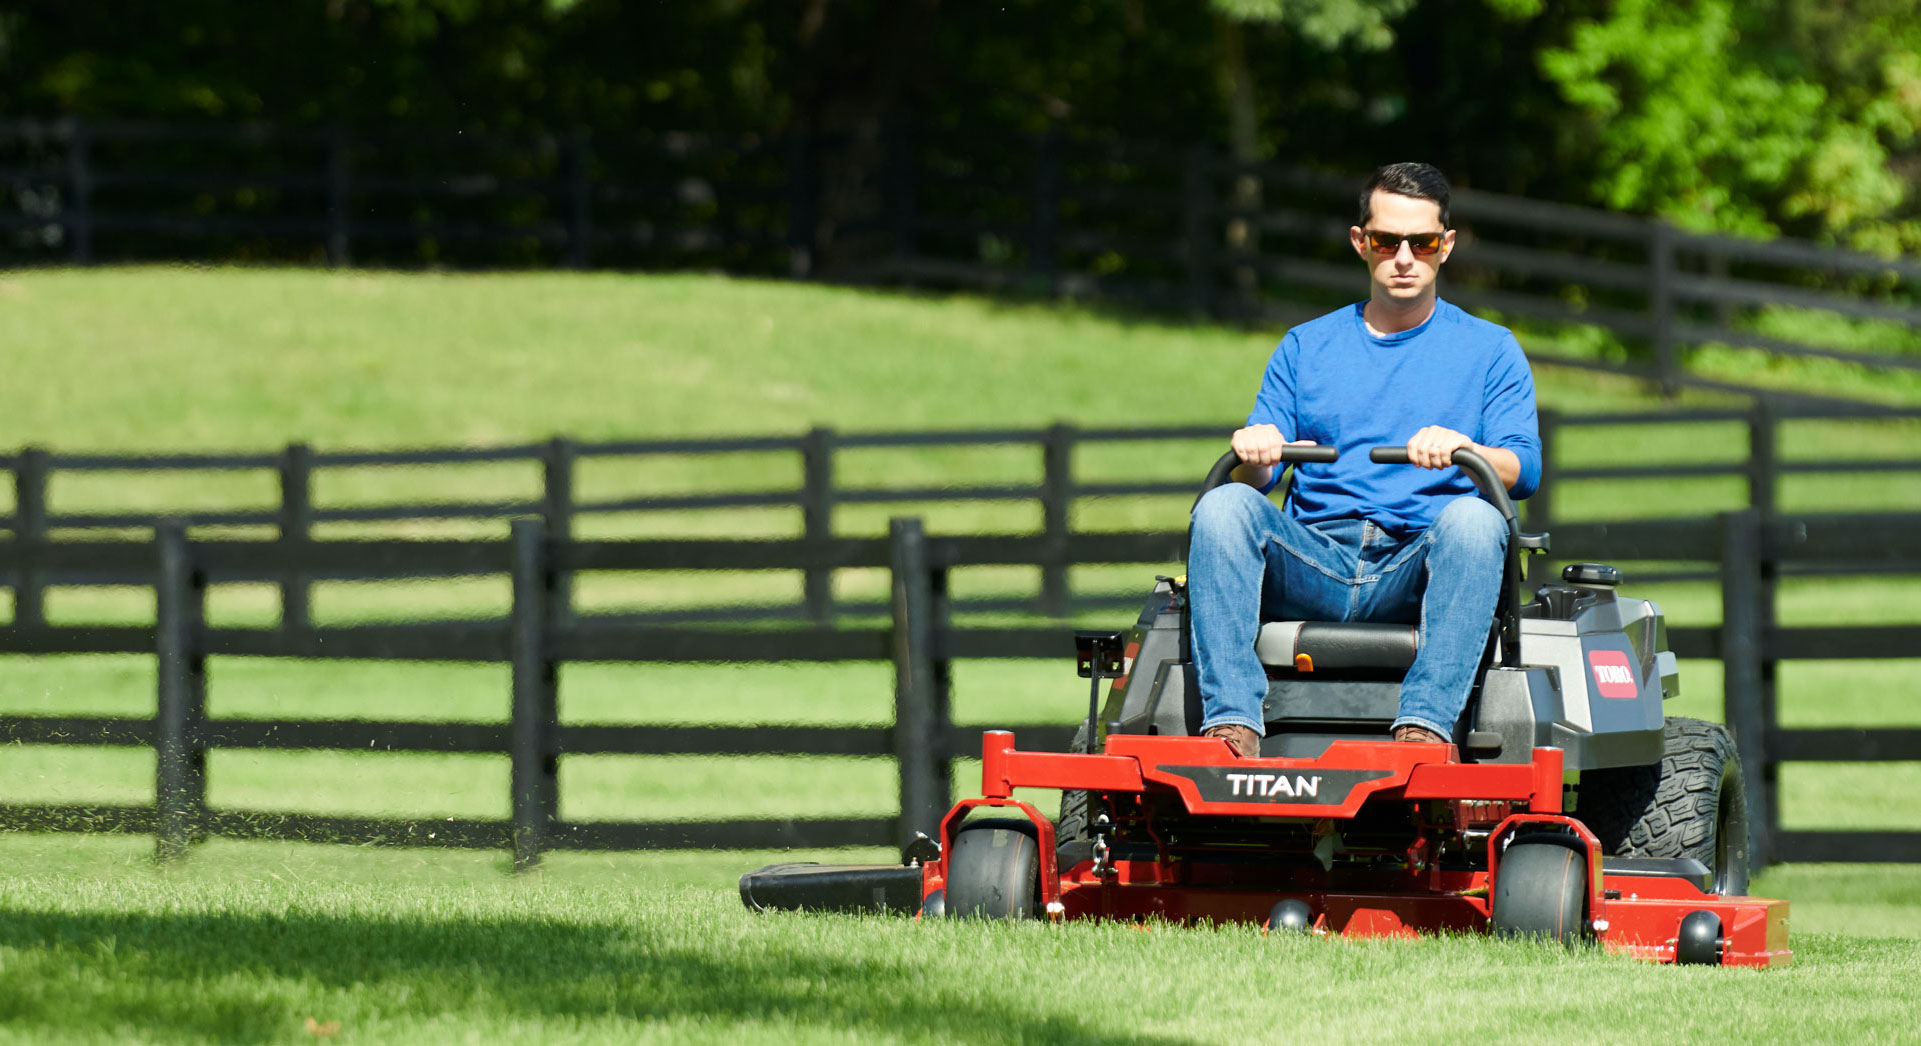 How to Lift a Riding Mower to Change Blades